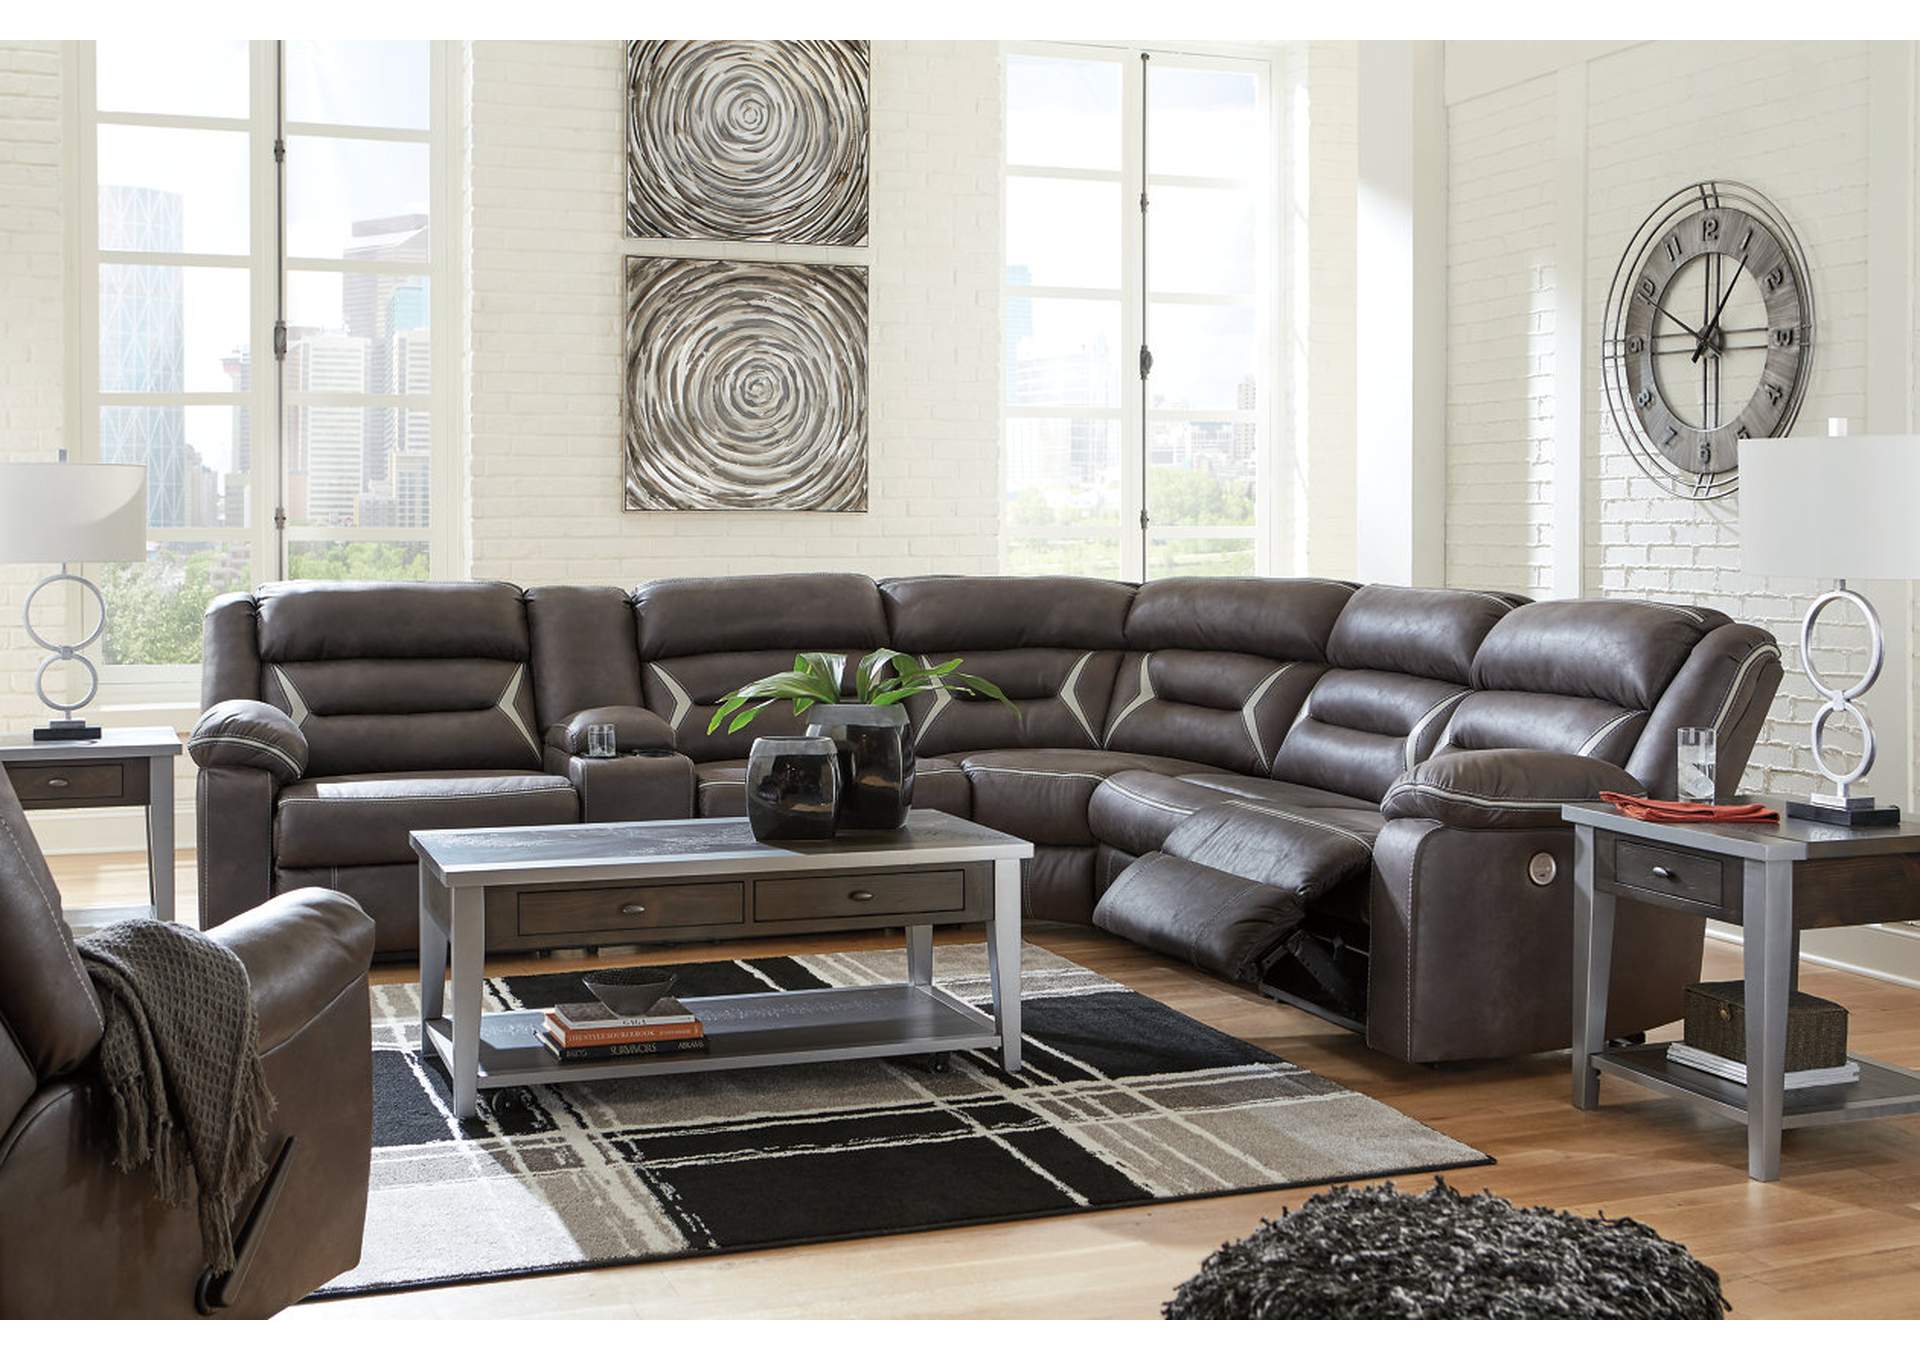 Kincord 4-Piece Sectional with Recliner,Signature Design By Ashley